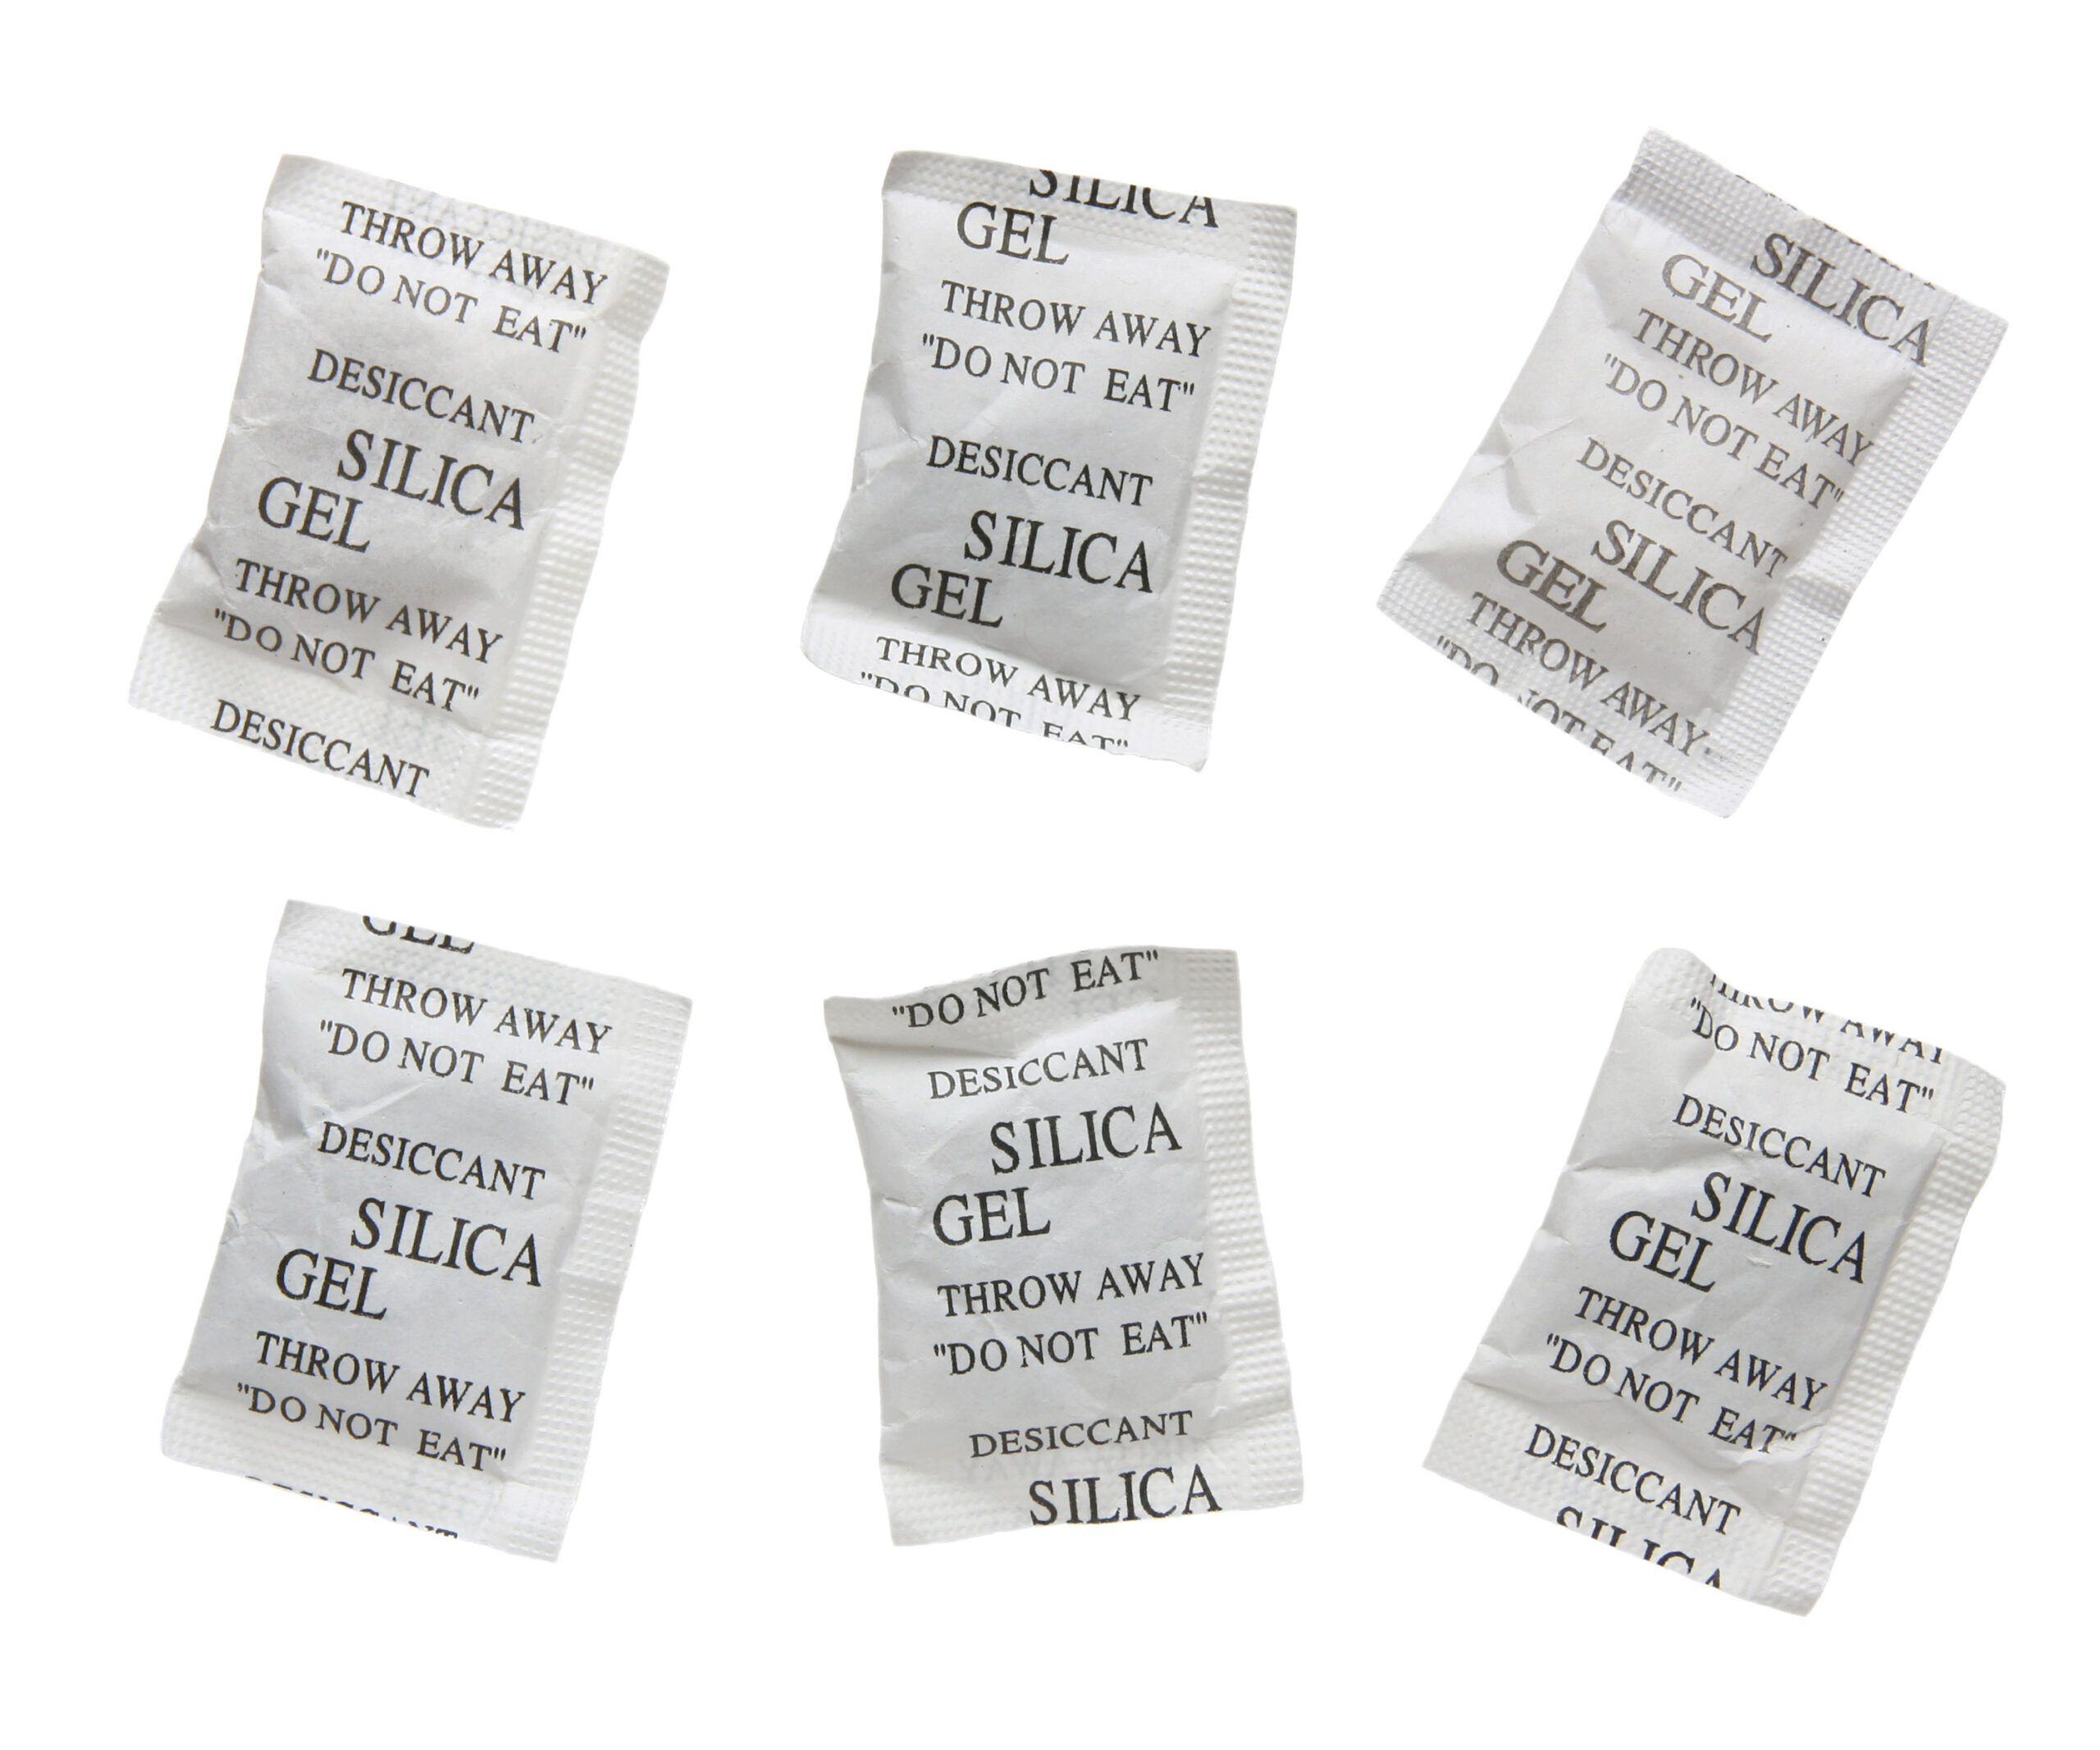 Here’s why you should keep silica gel bags